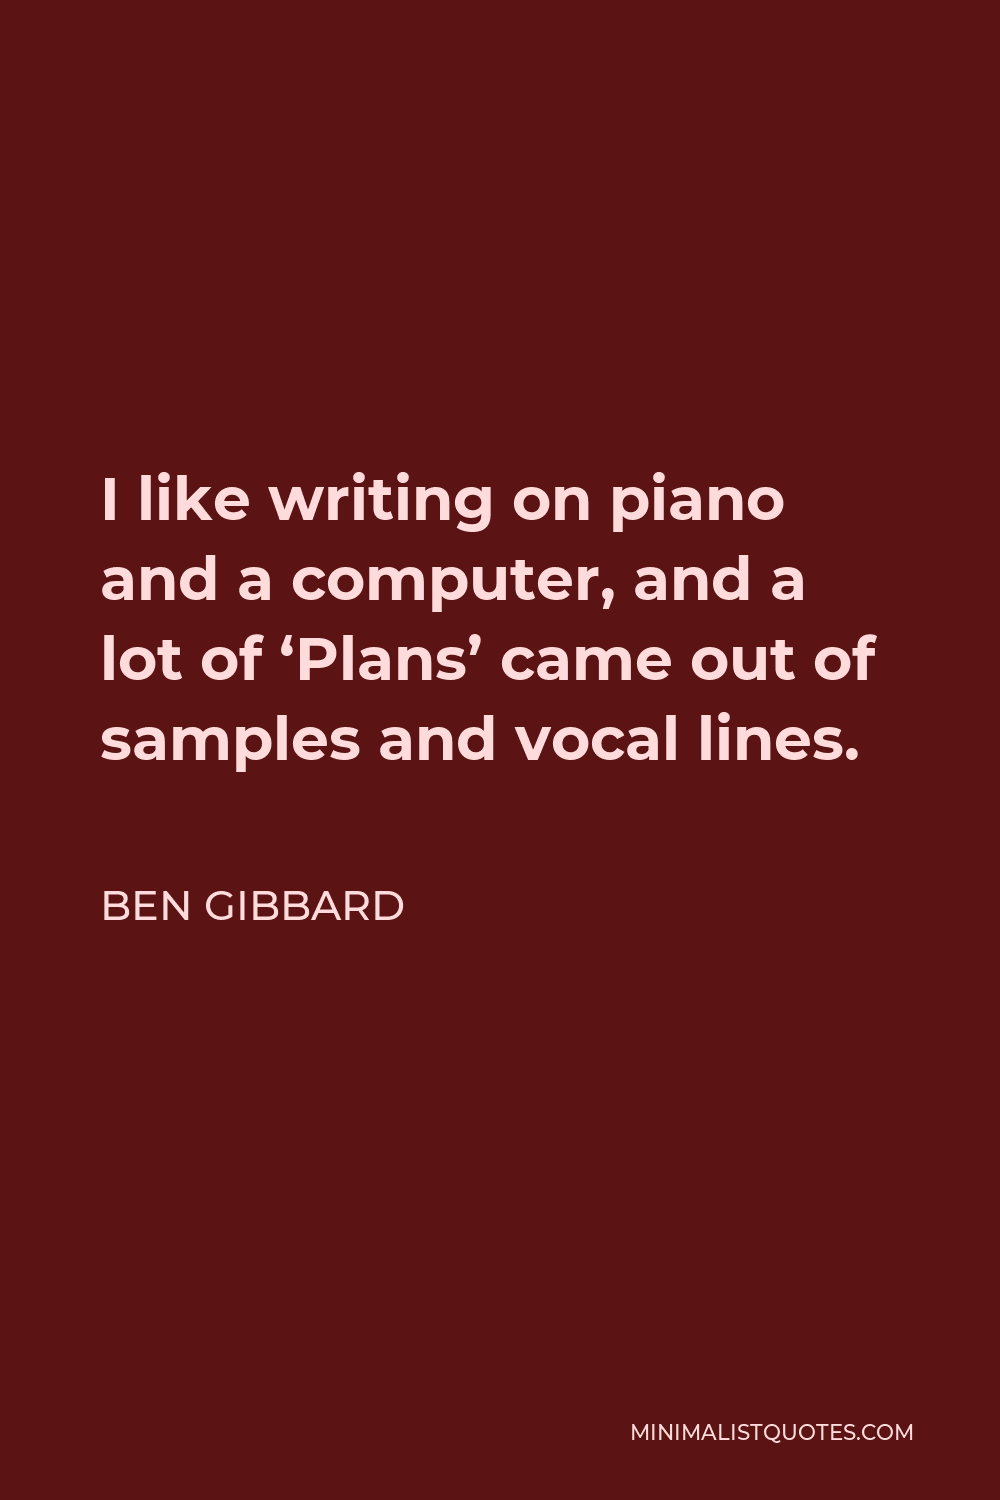 Ben Gibbard Quote - I like writing on piano and a computer, and a lot of ‘Plans’ came out of samples and vocal lines.